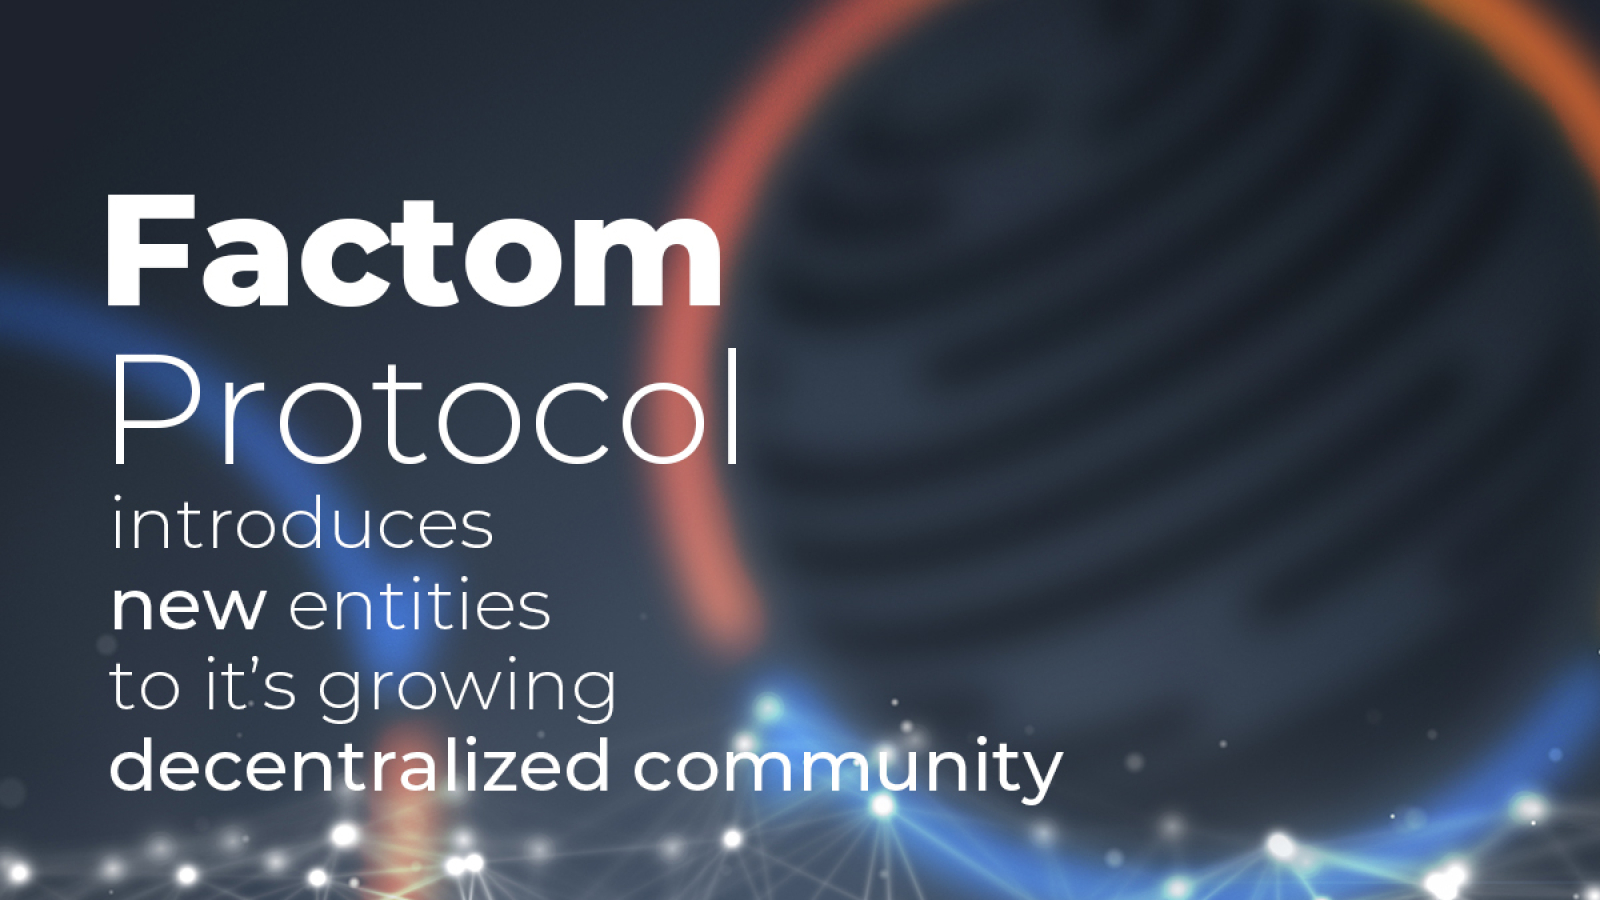 The Factom® Protocol introduces four new Authority Node Operators to its decentralized governance model